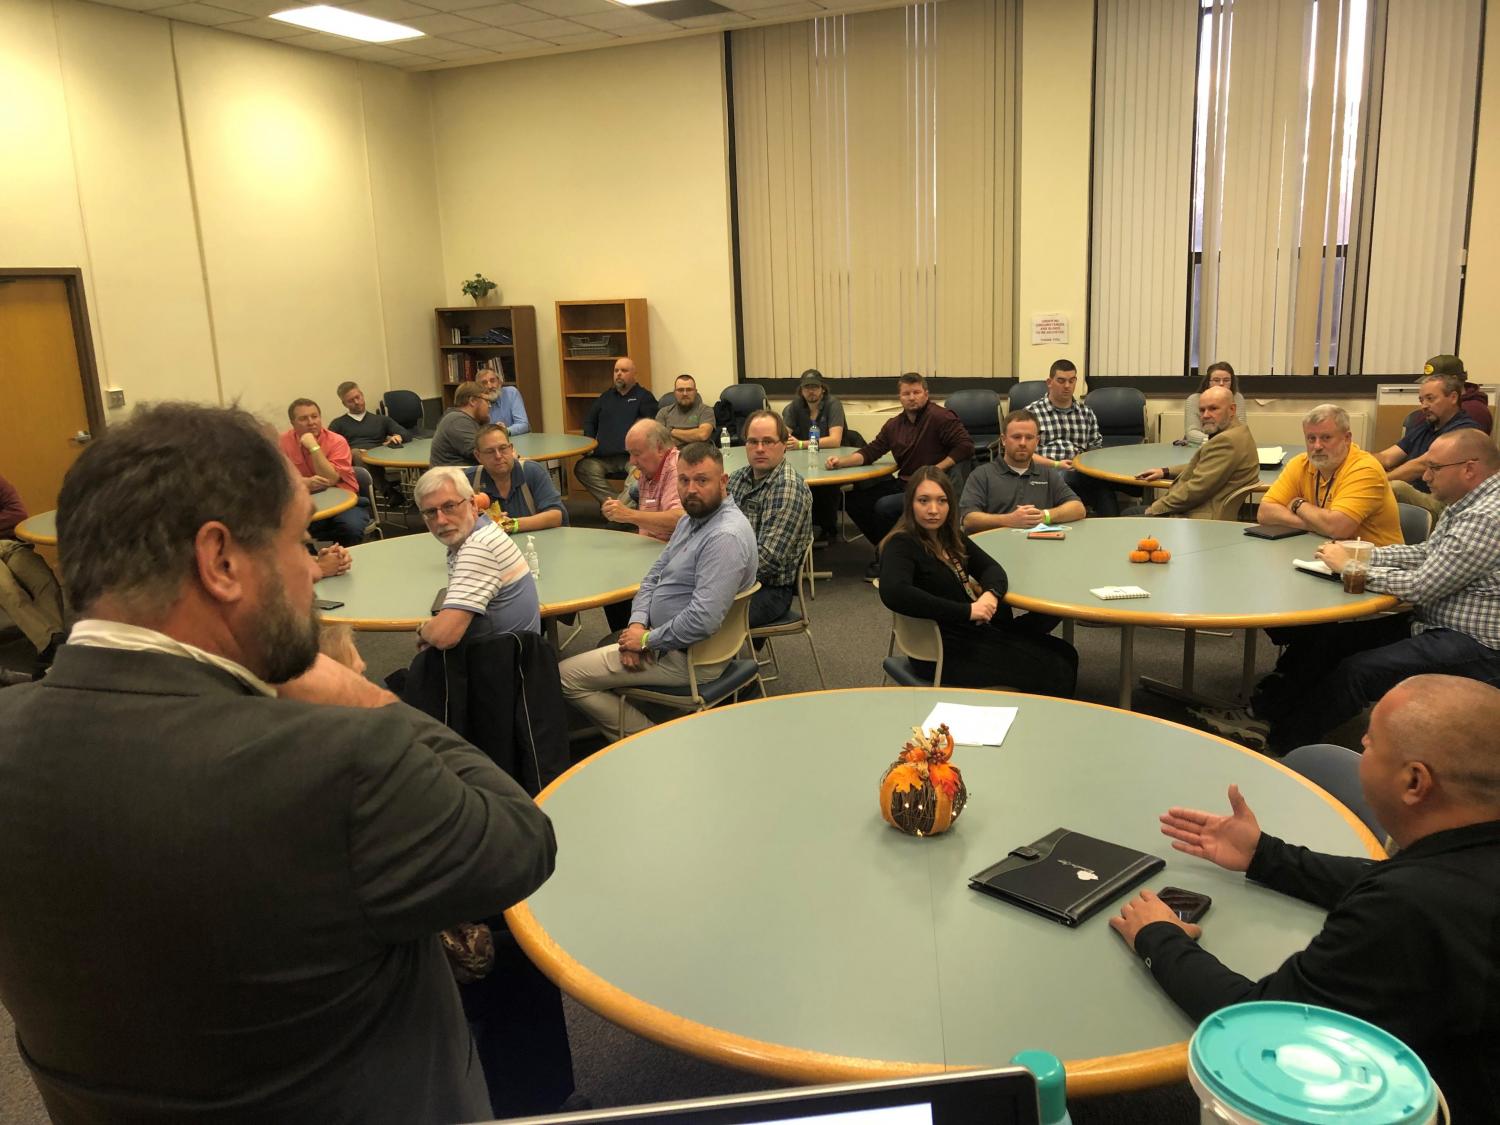 Nearly a dozen selected industry leaders joined 30 Bluefield State College Engineering Technology students, faculty and administrators for the first meeting of Bluefield State College’s Industry Advisory Board (IAB), November 16.